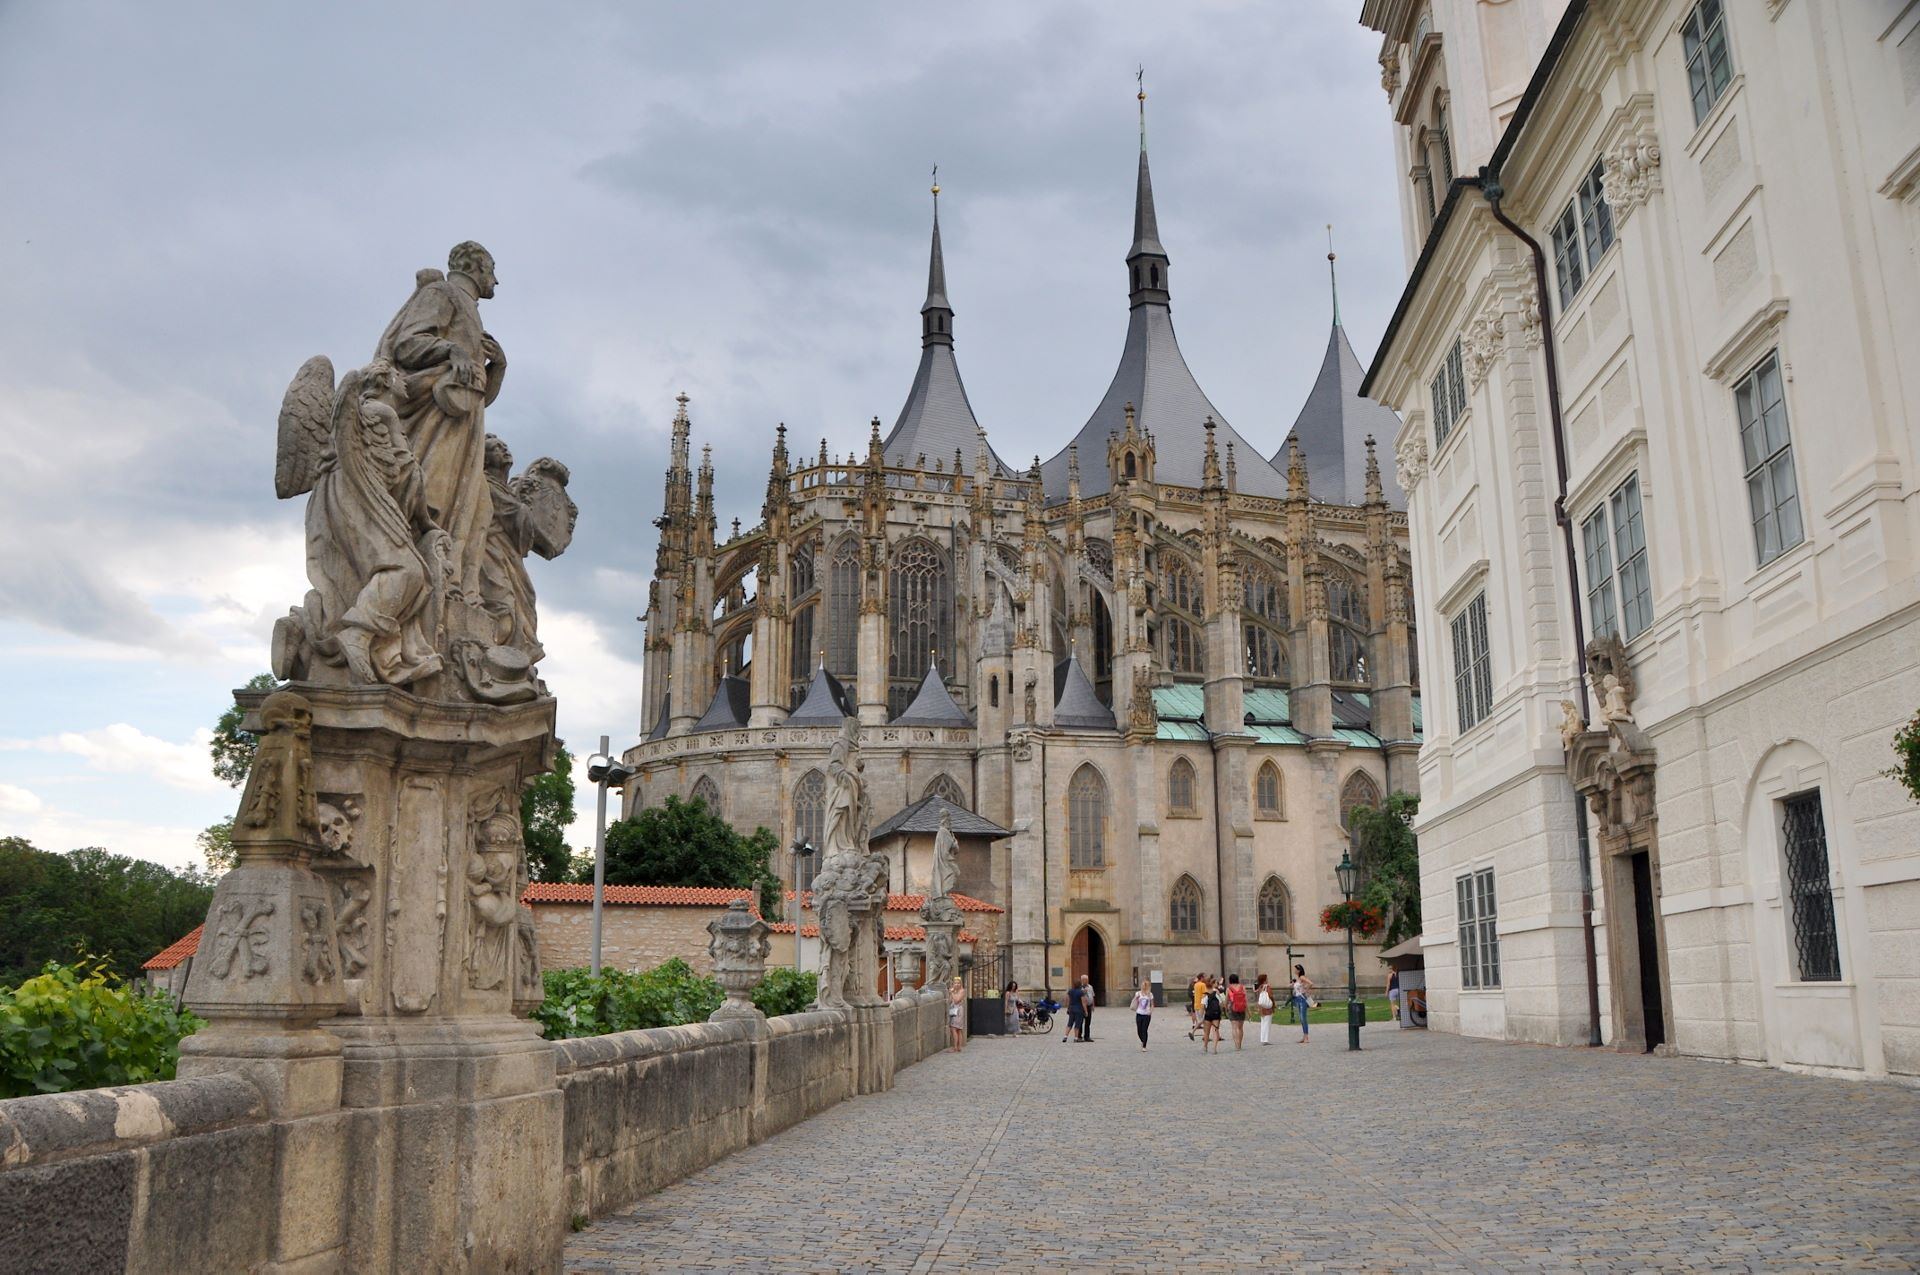 How to get to Kutná Hora